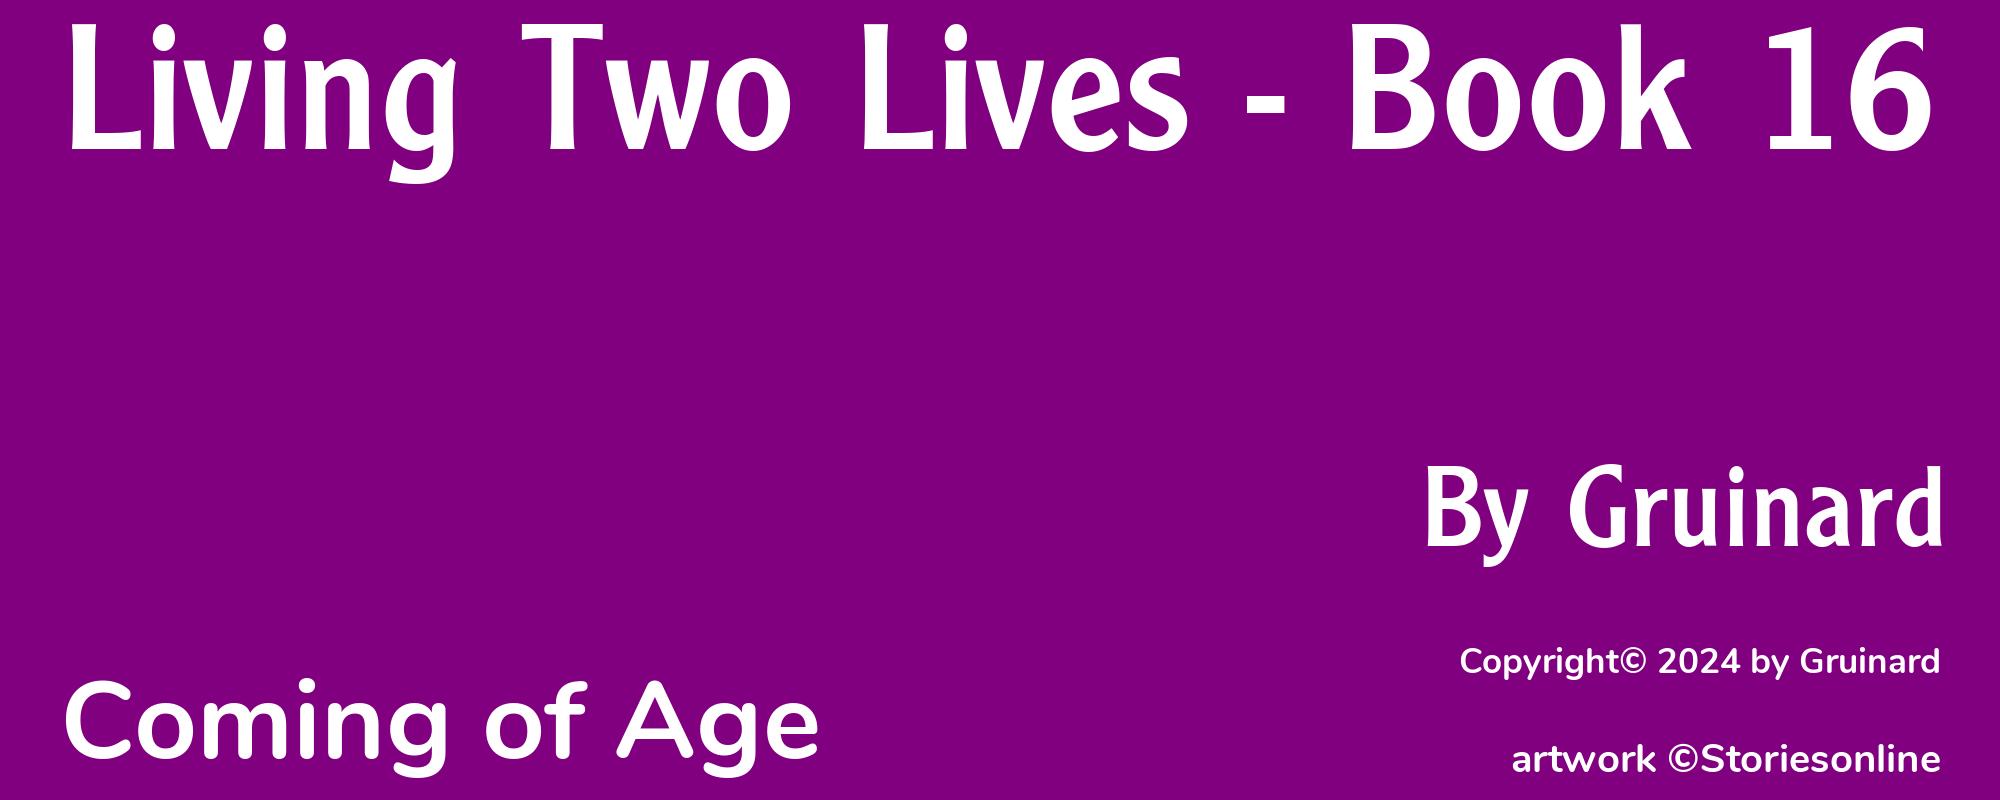 Living Two Lives - Book 16 - Cover